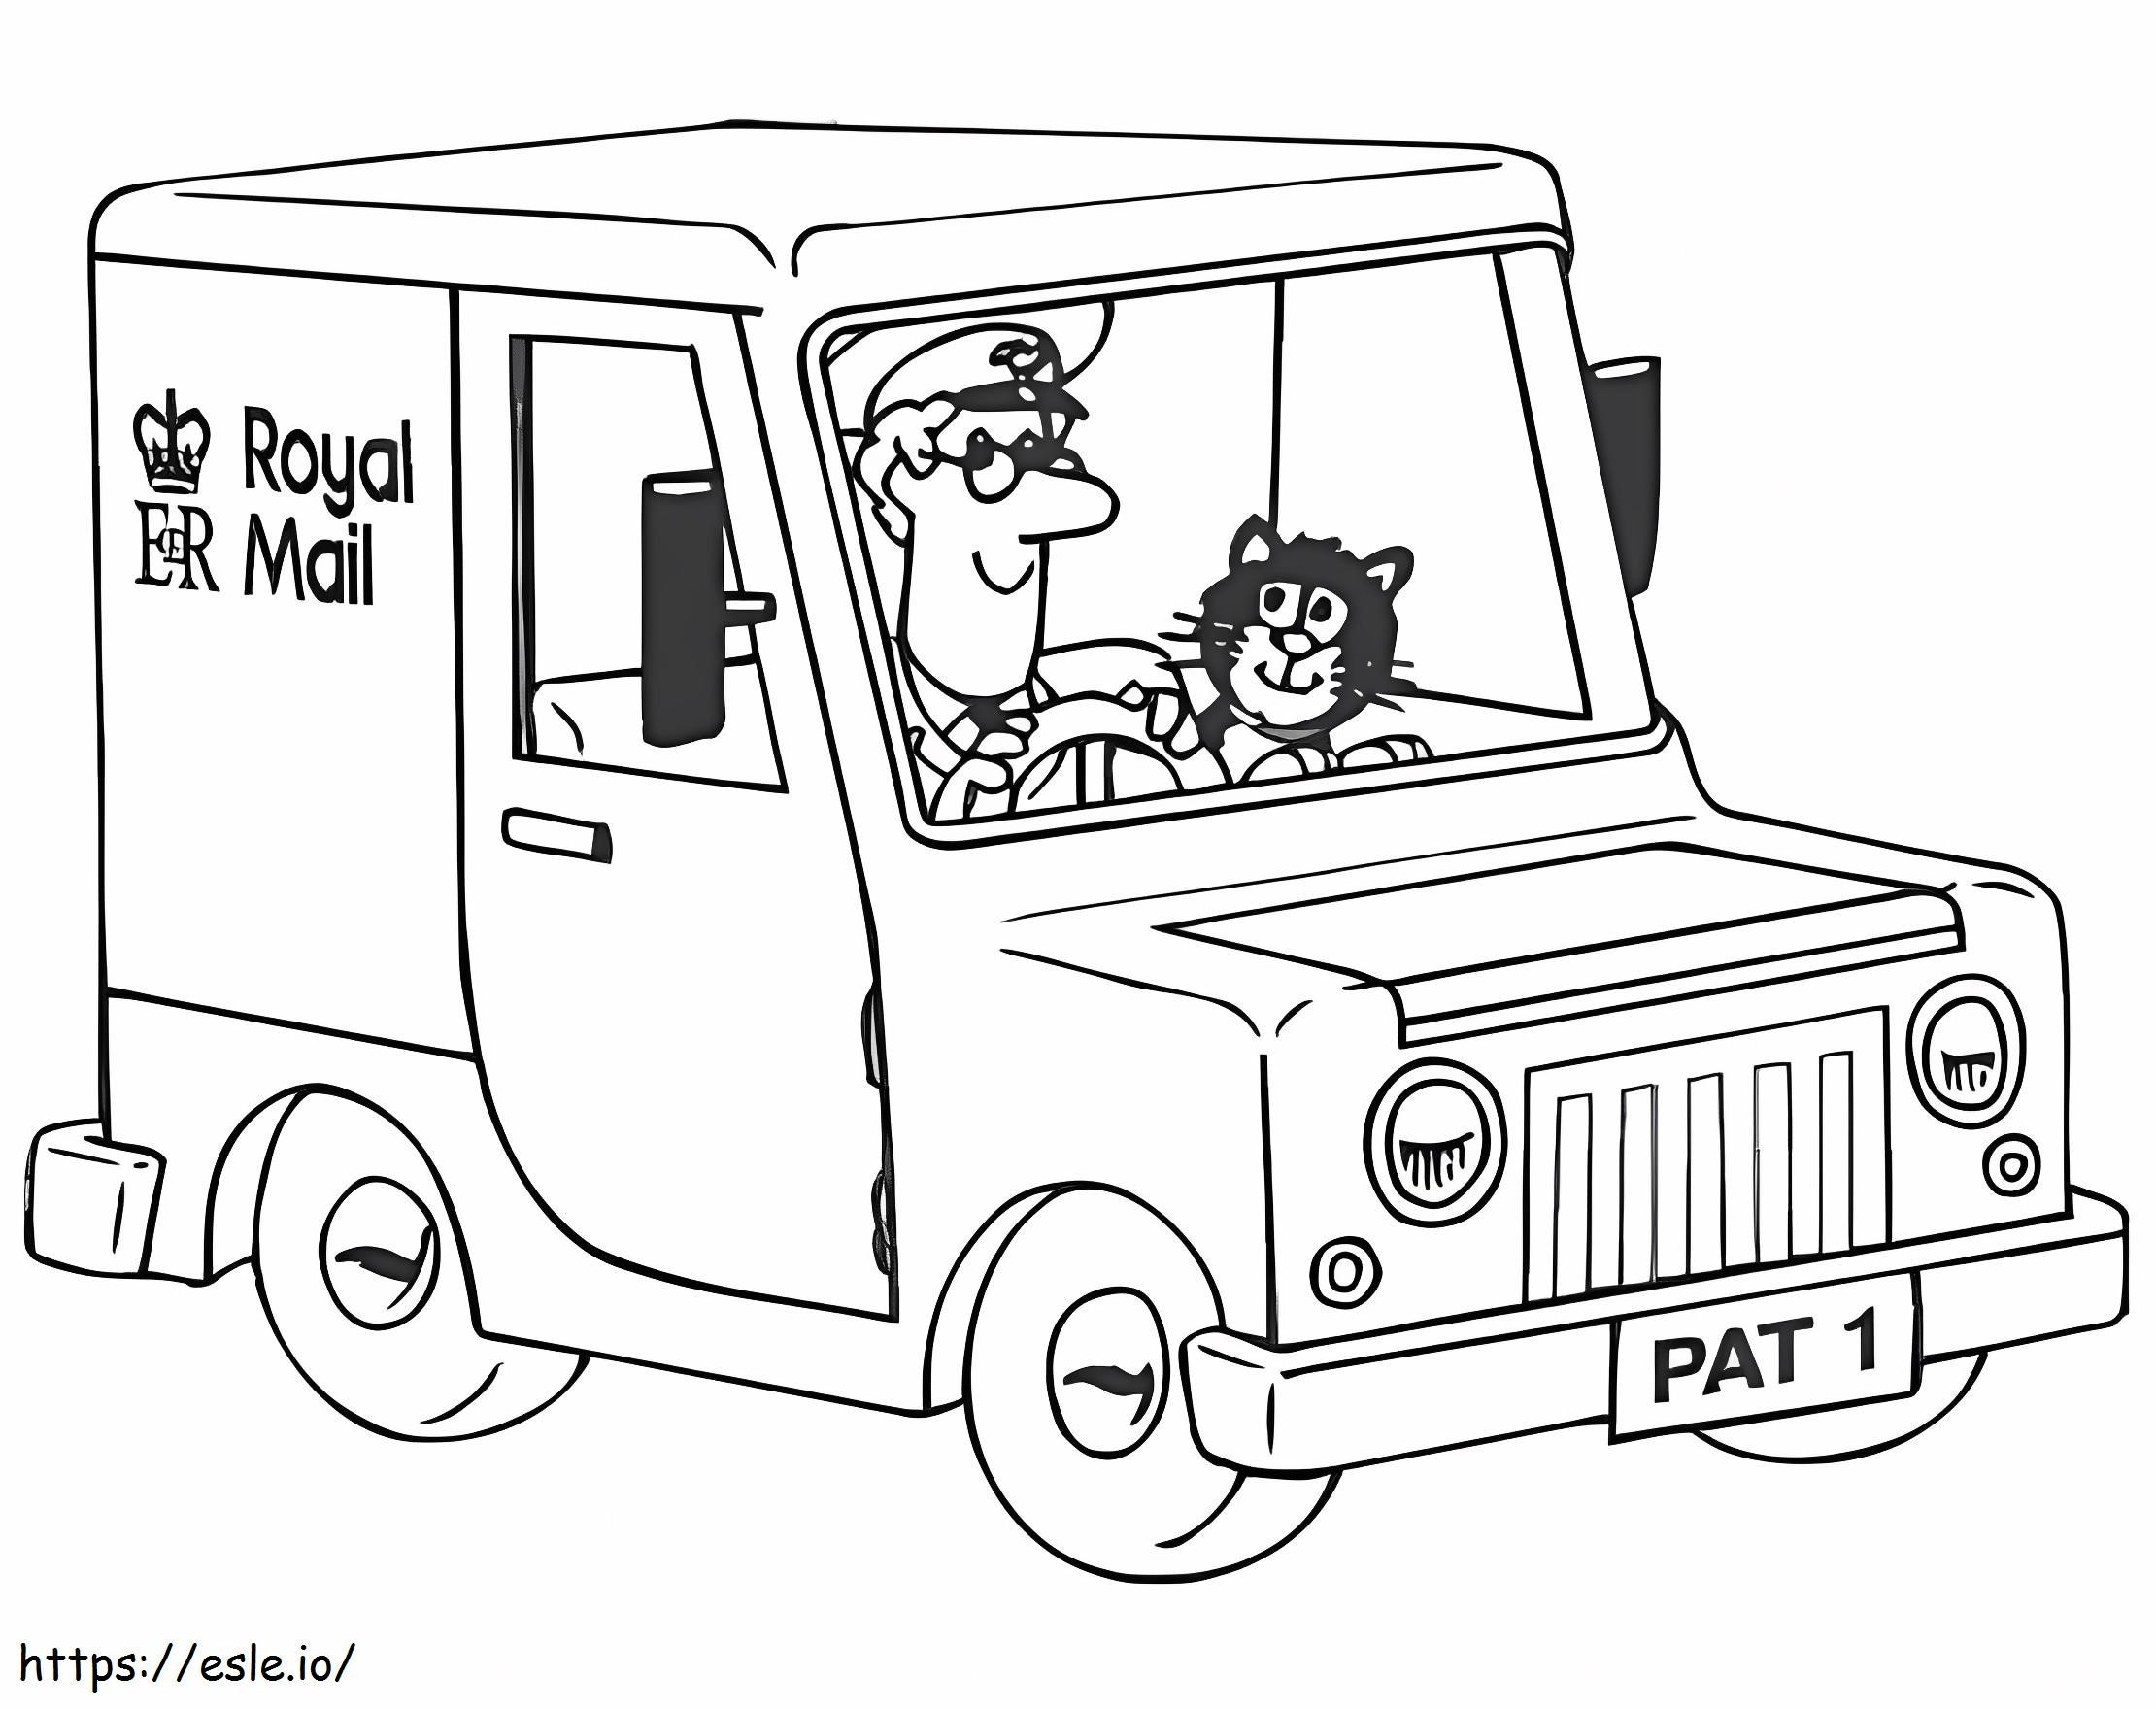 Postman Pat And Cat In The Car coloring page